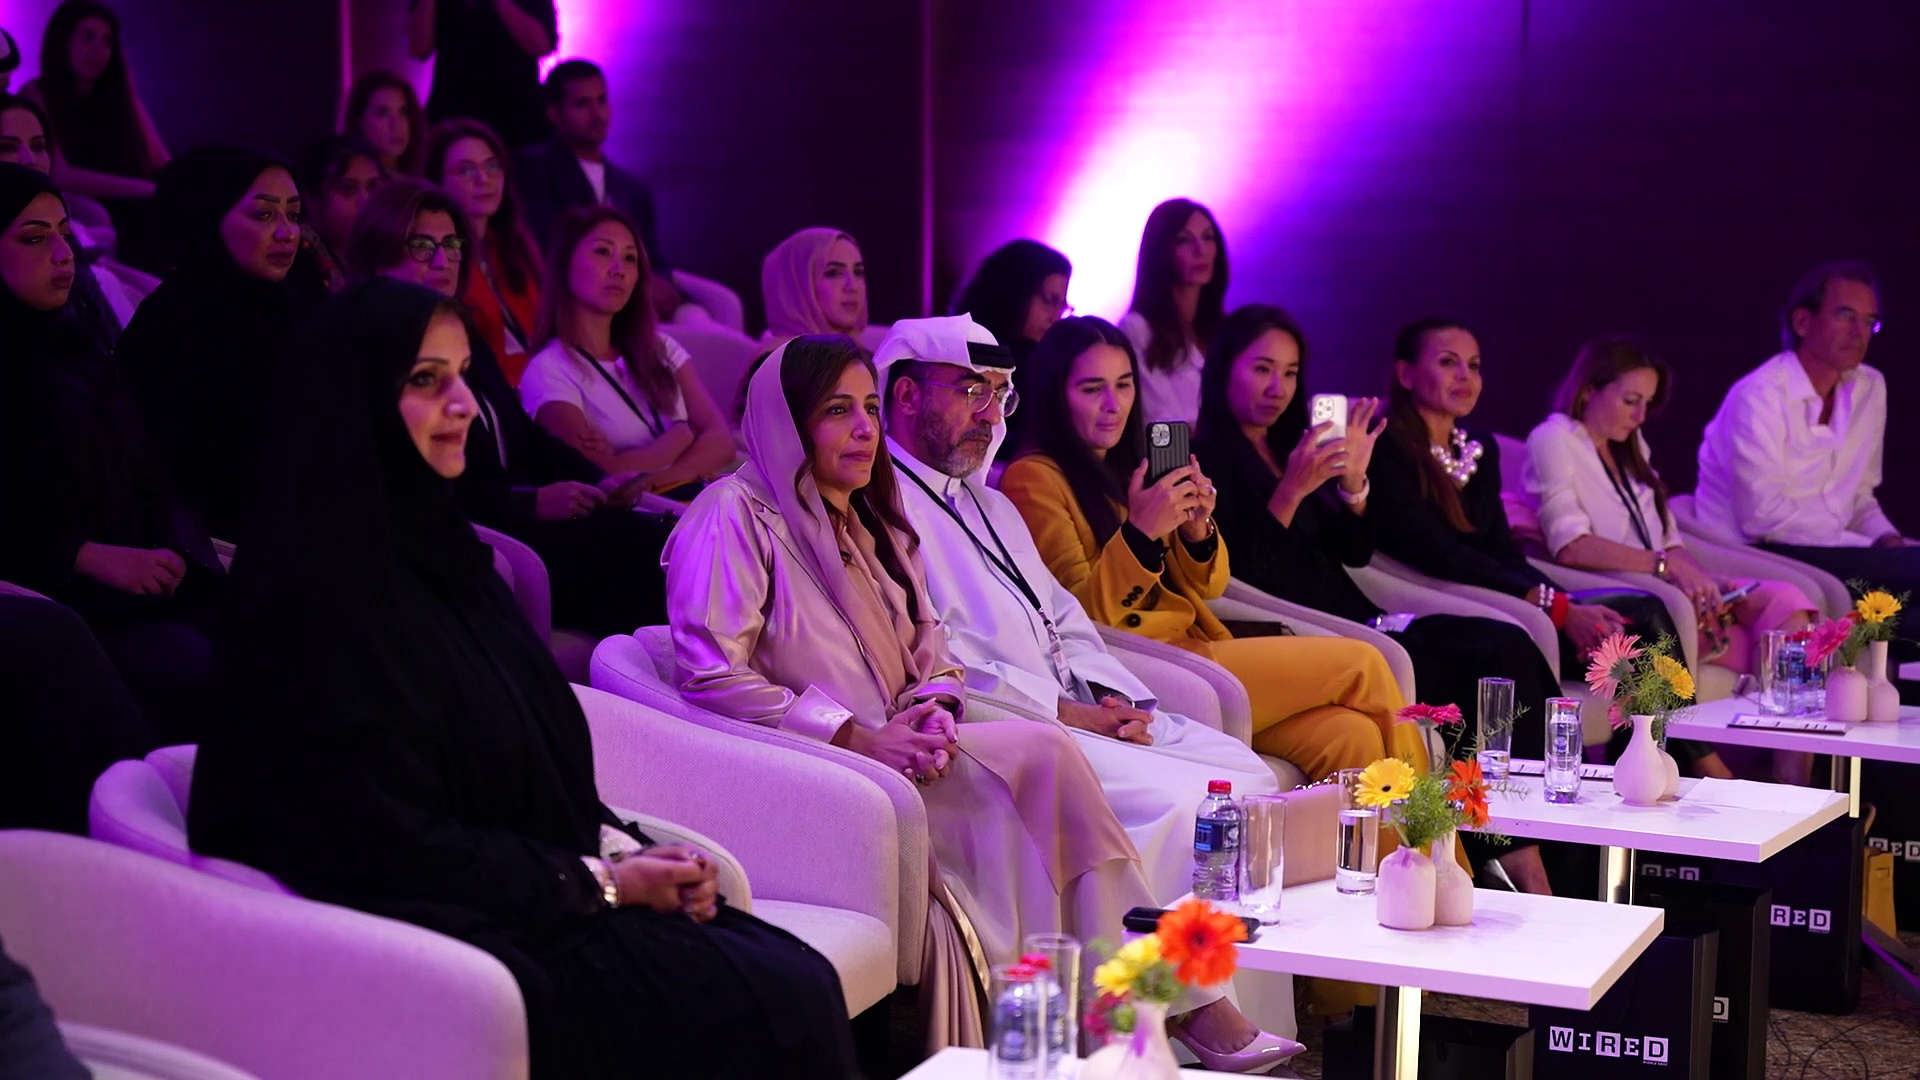 Video: Bodour Al Qasimi tells tech firms to open top jobs to women and create fairer workplaces